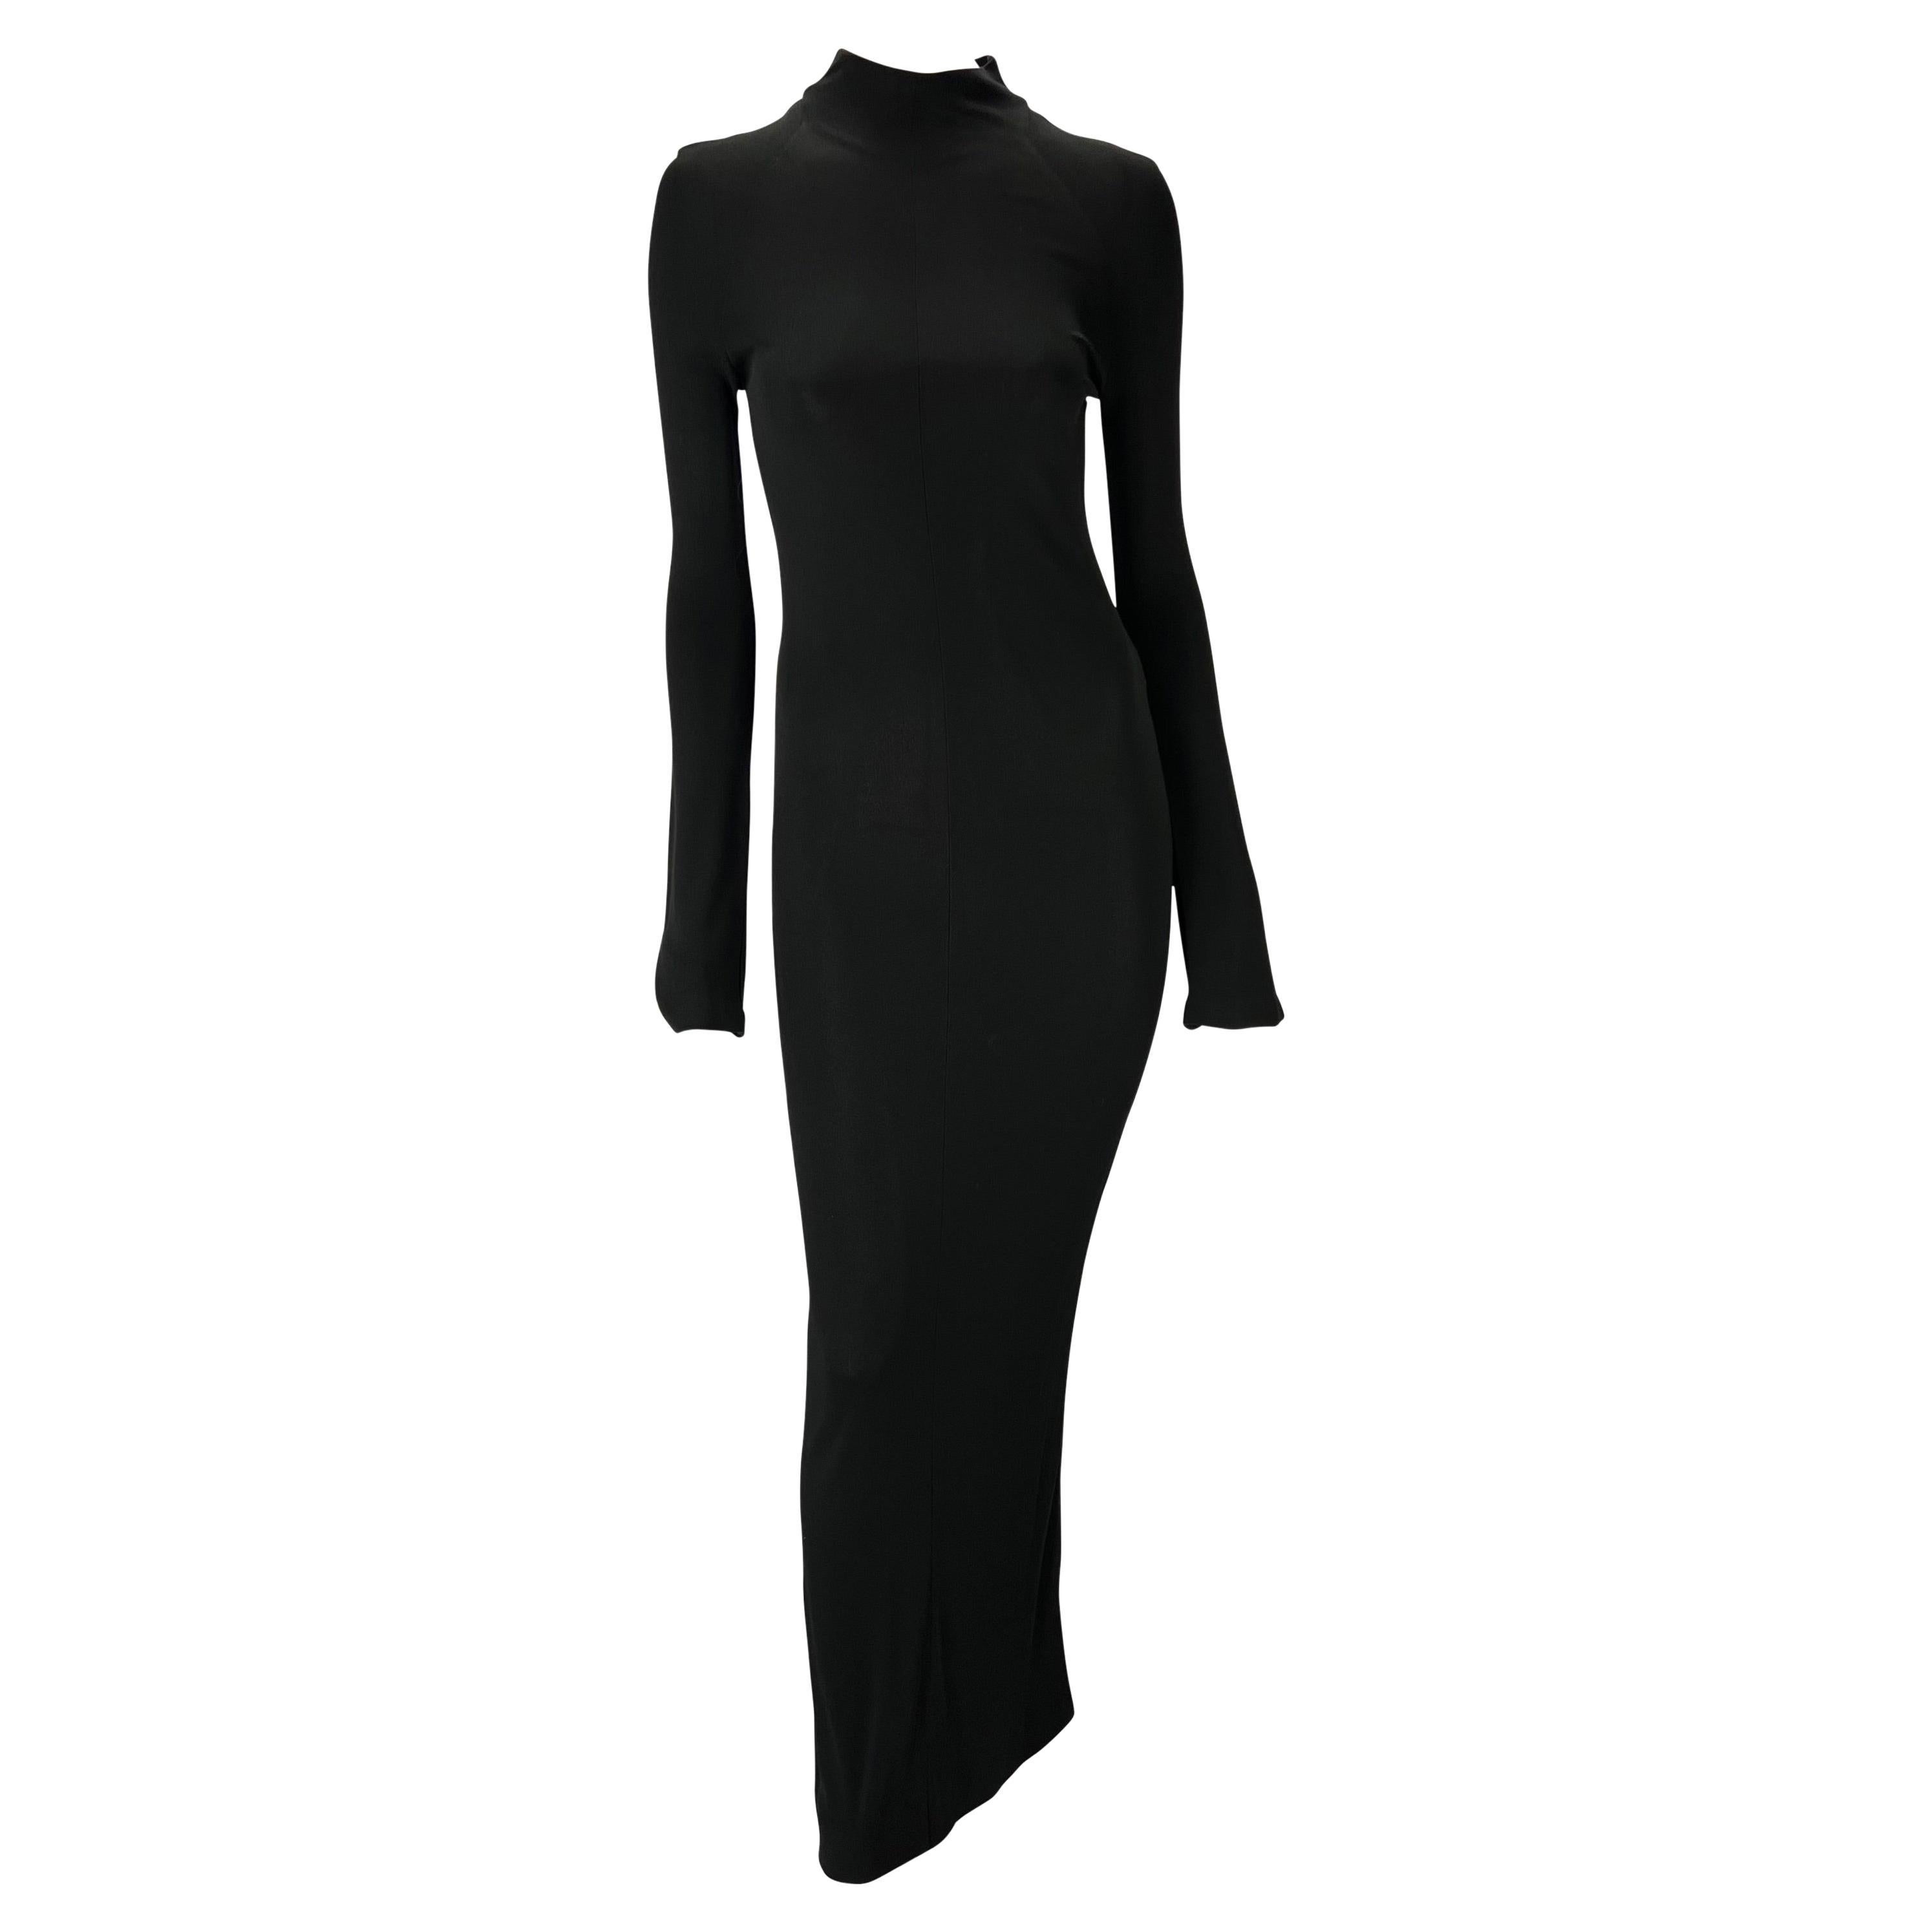 S/S 1998 Gucci by Tom Ford Black Stretch Viscose Long Sleeve Gown For Sale